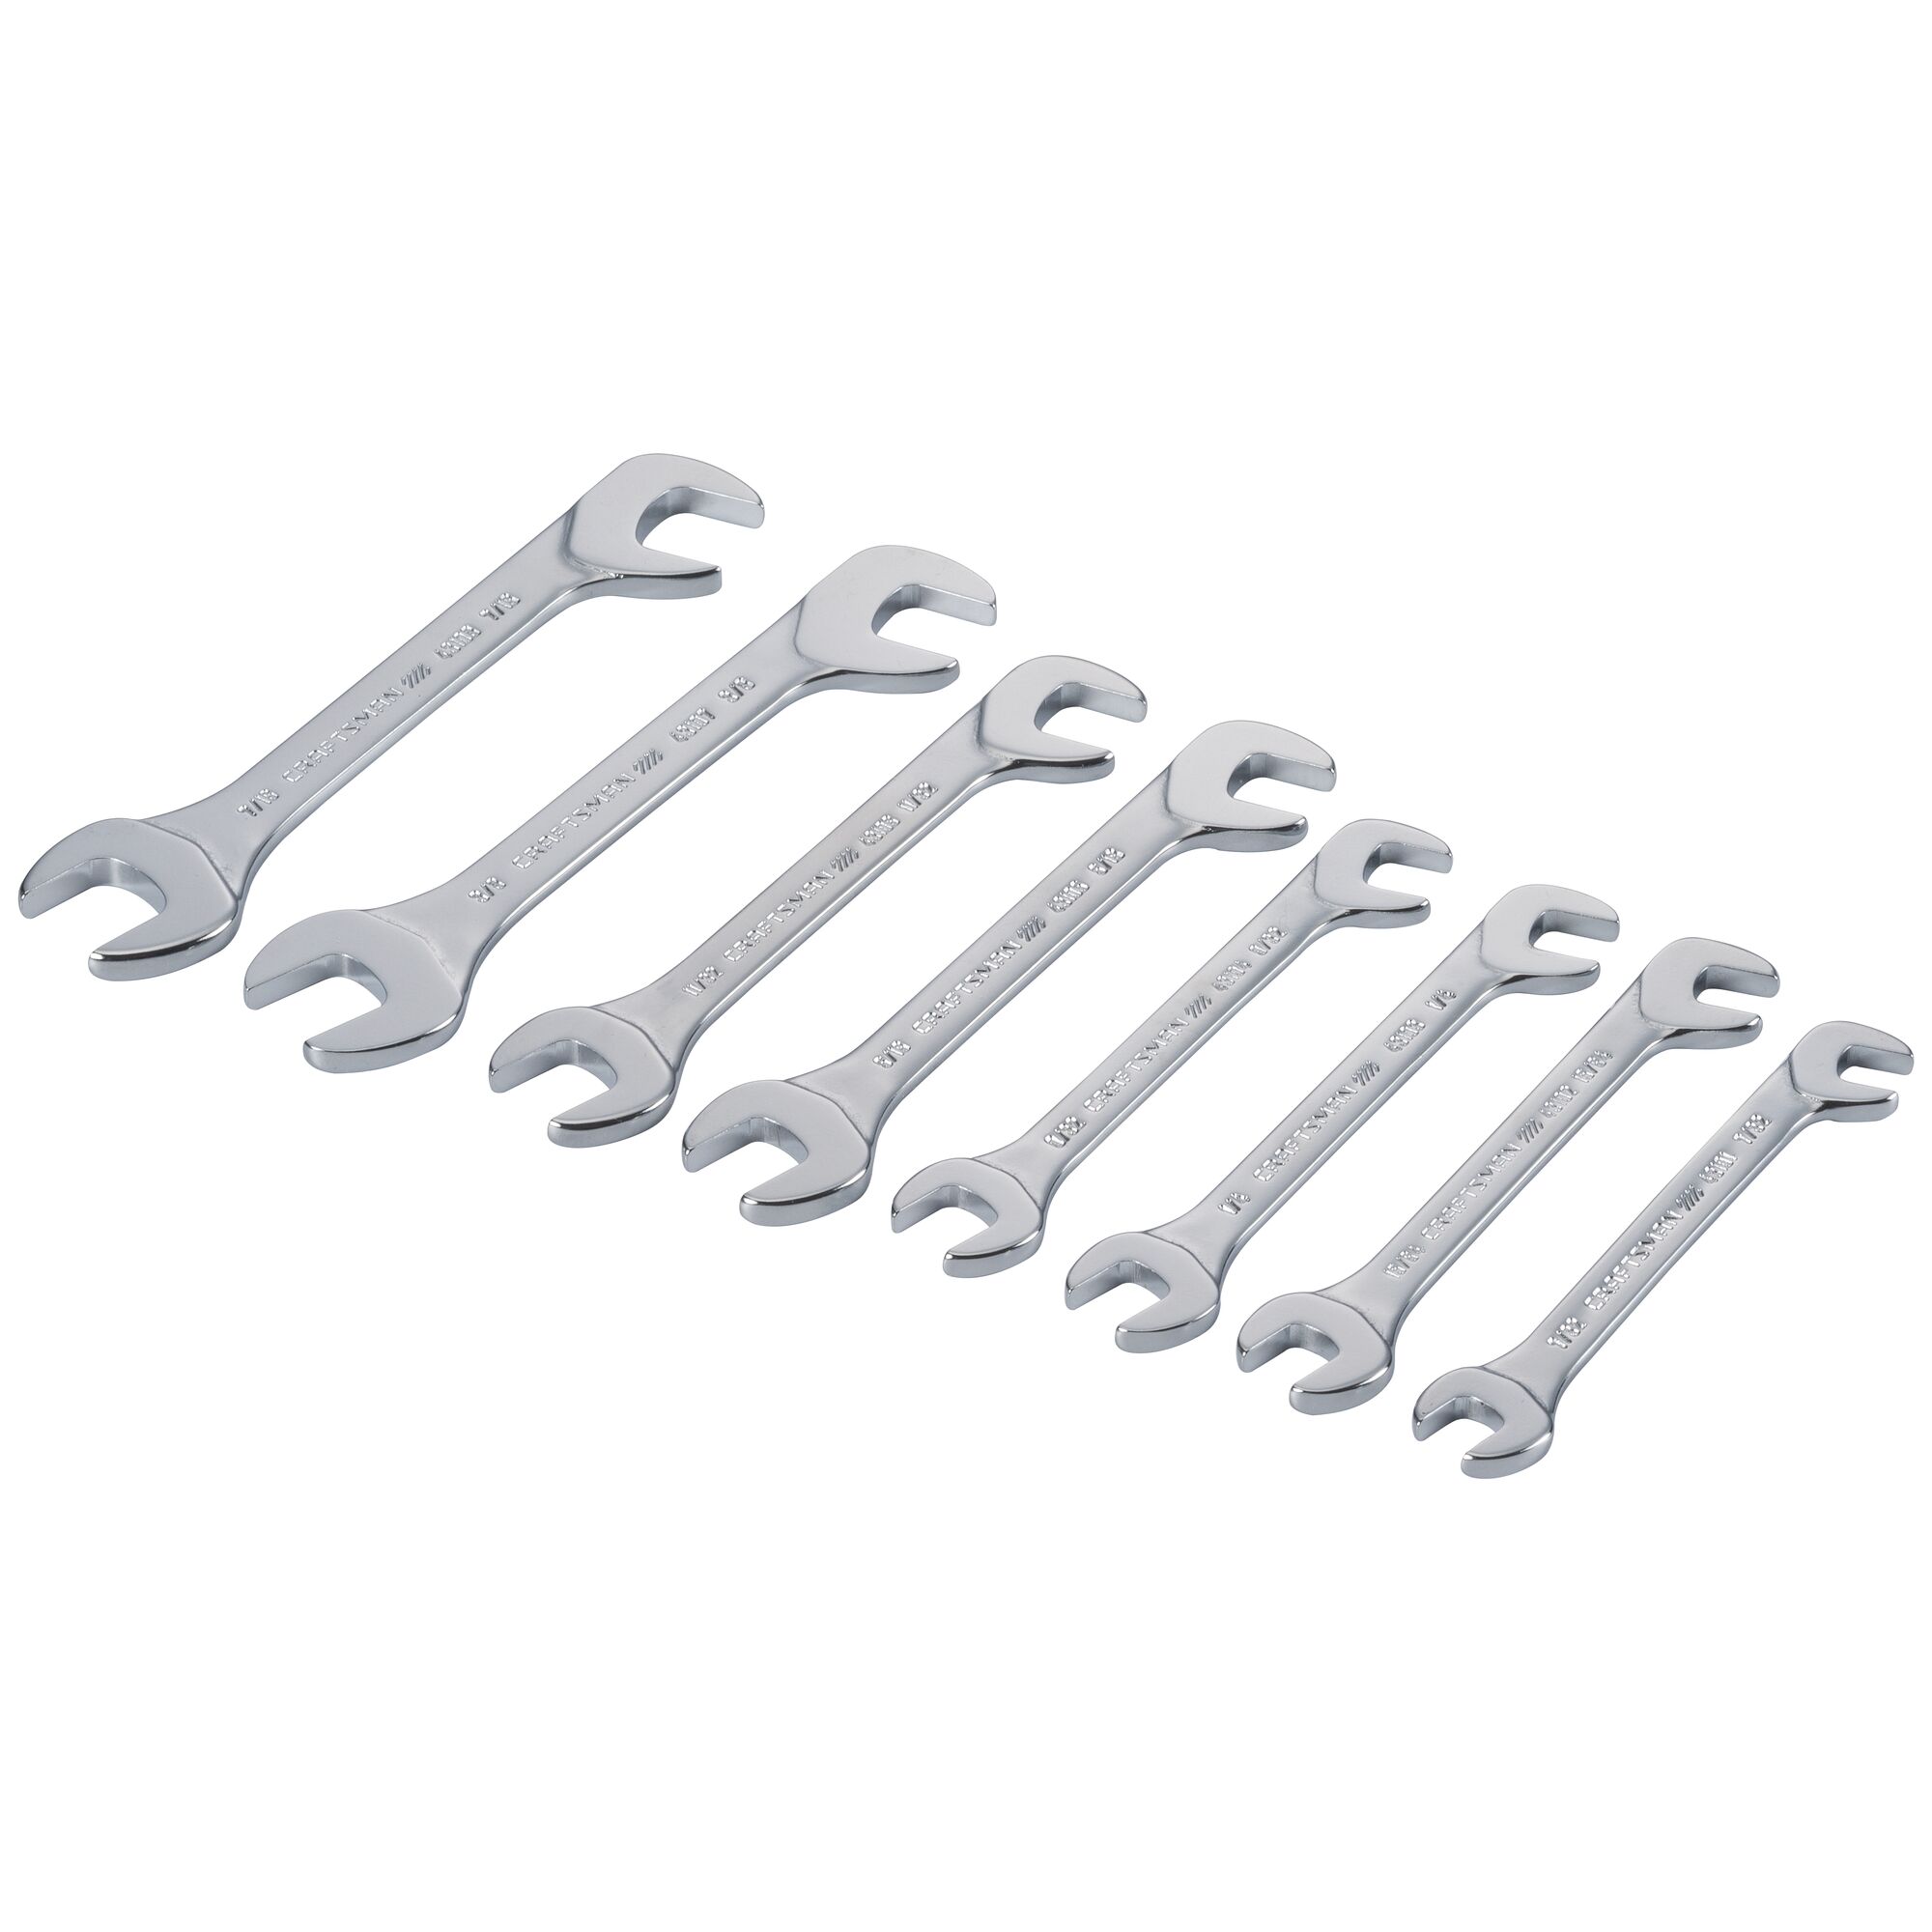 Left profile of set of 8 S A E open end wrenches.